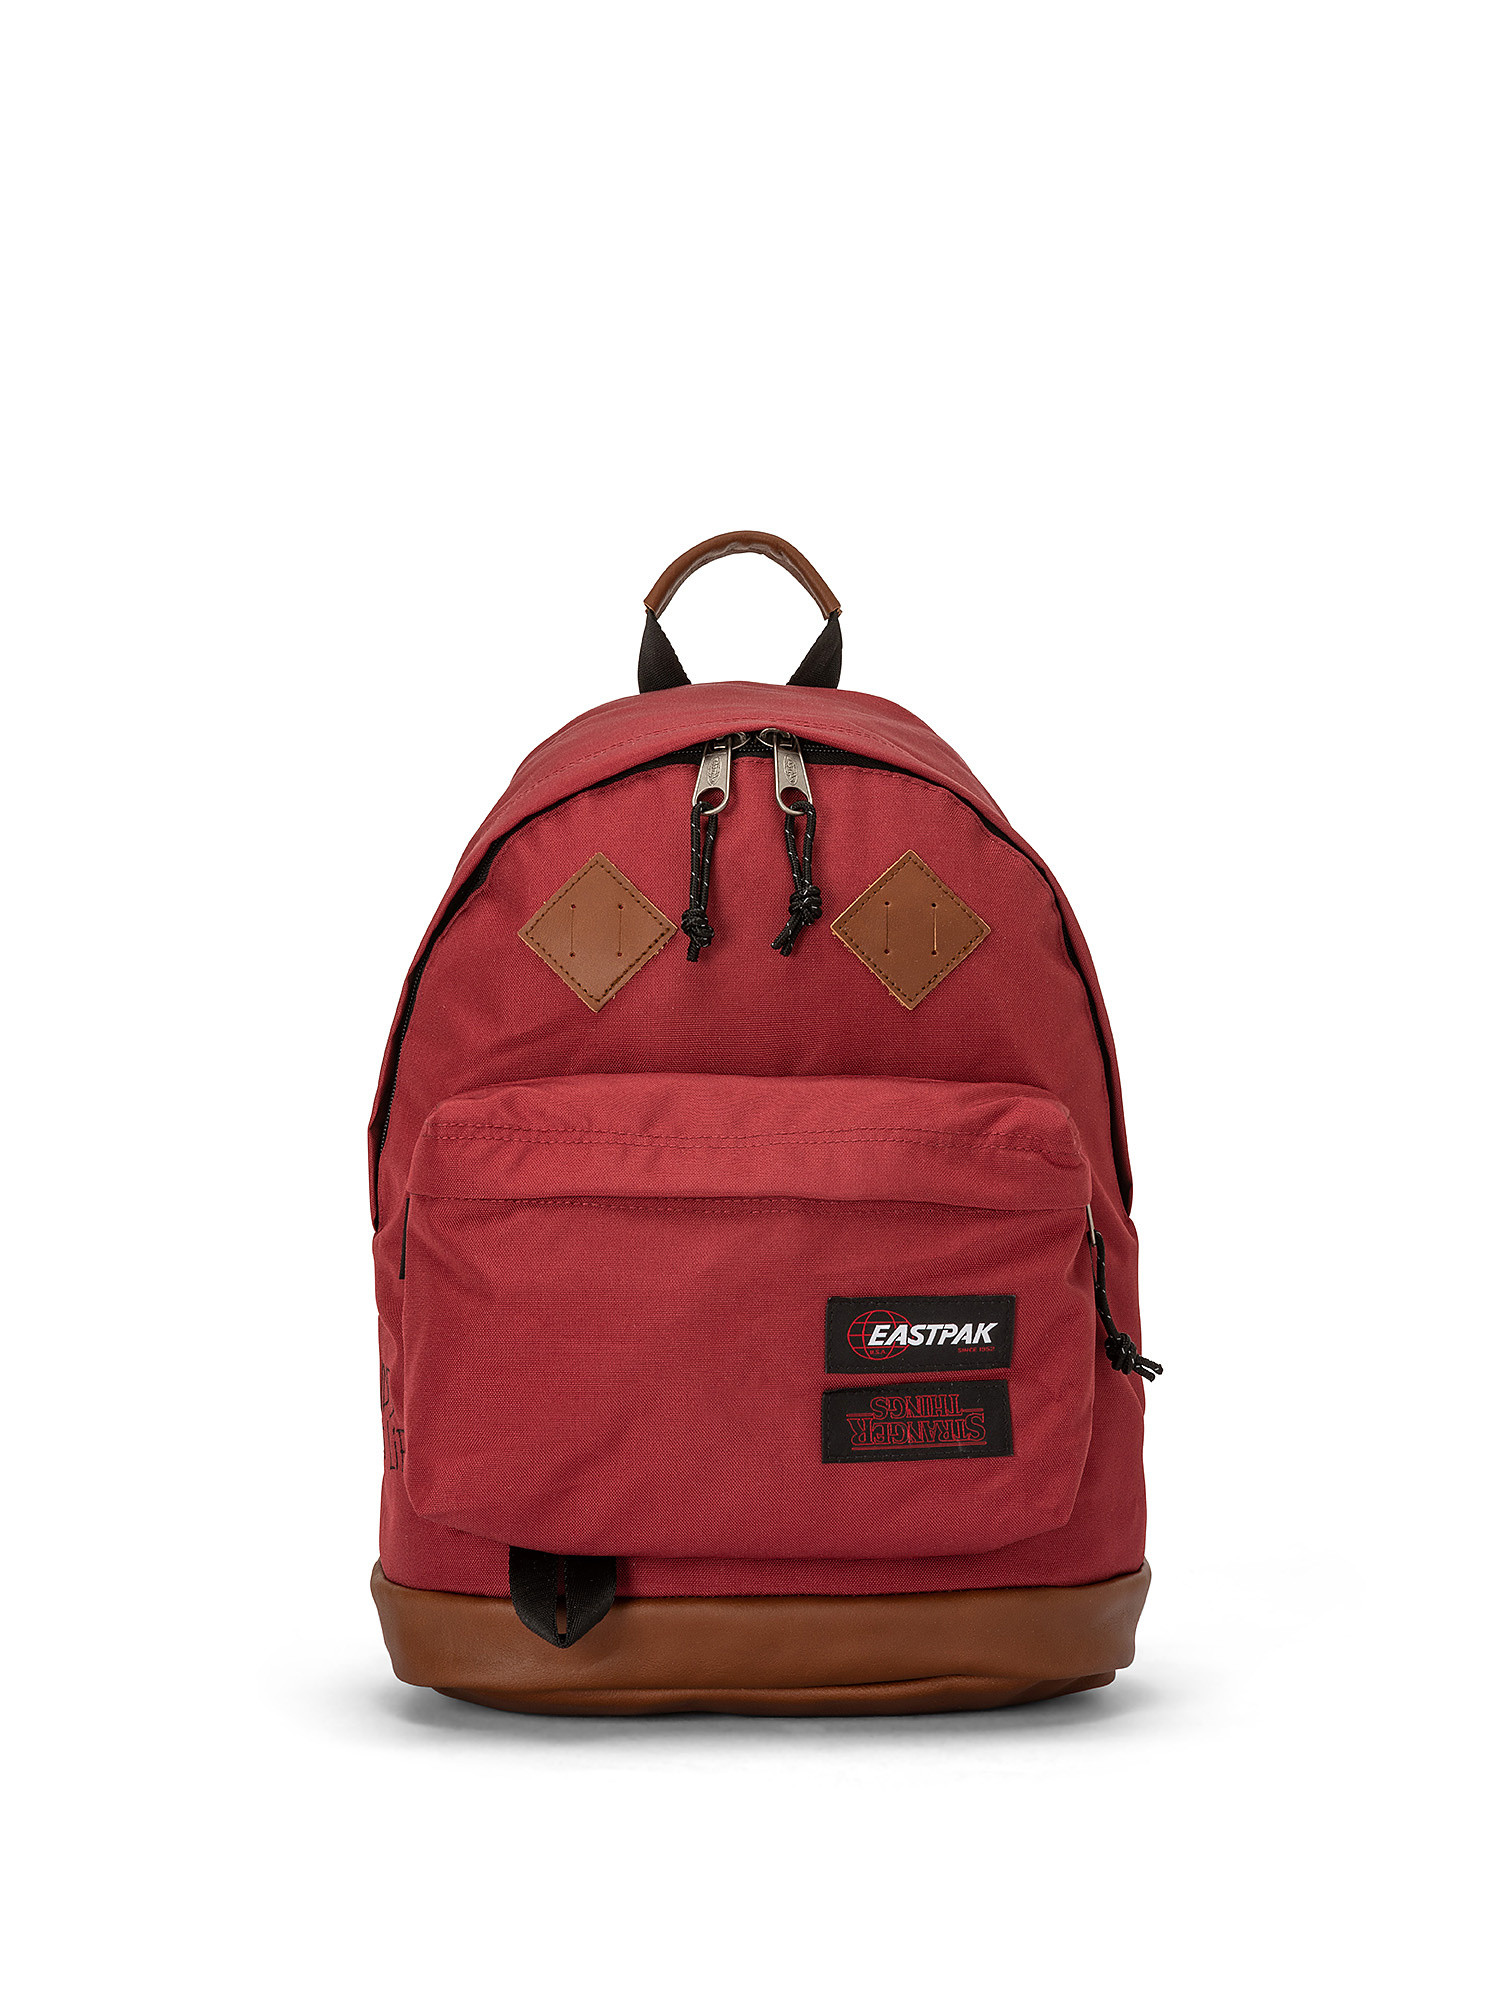 Backpack in collaboration with Stranger Things, Multicolor, large image number 0